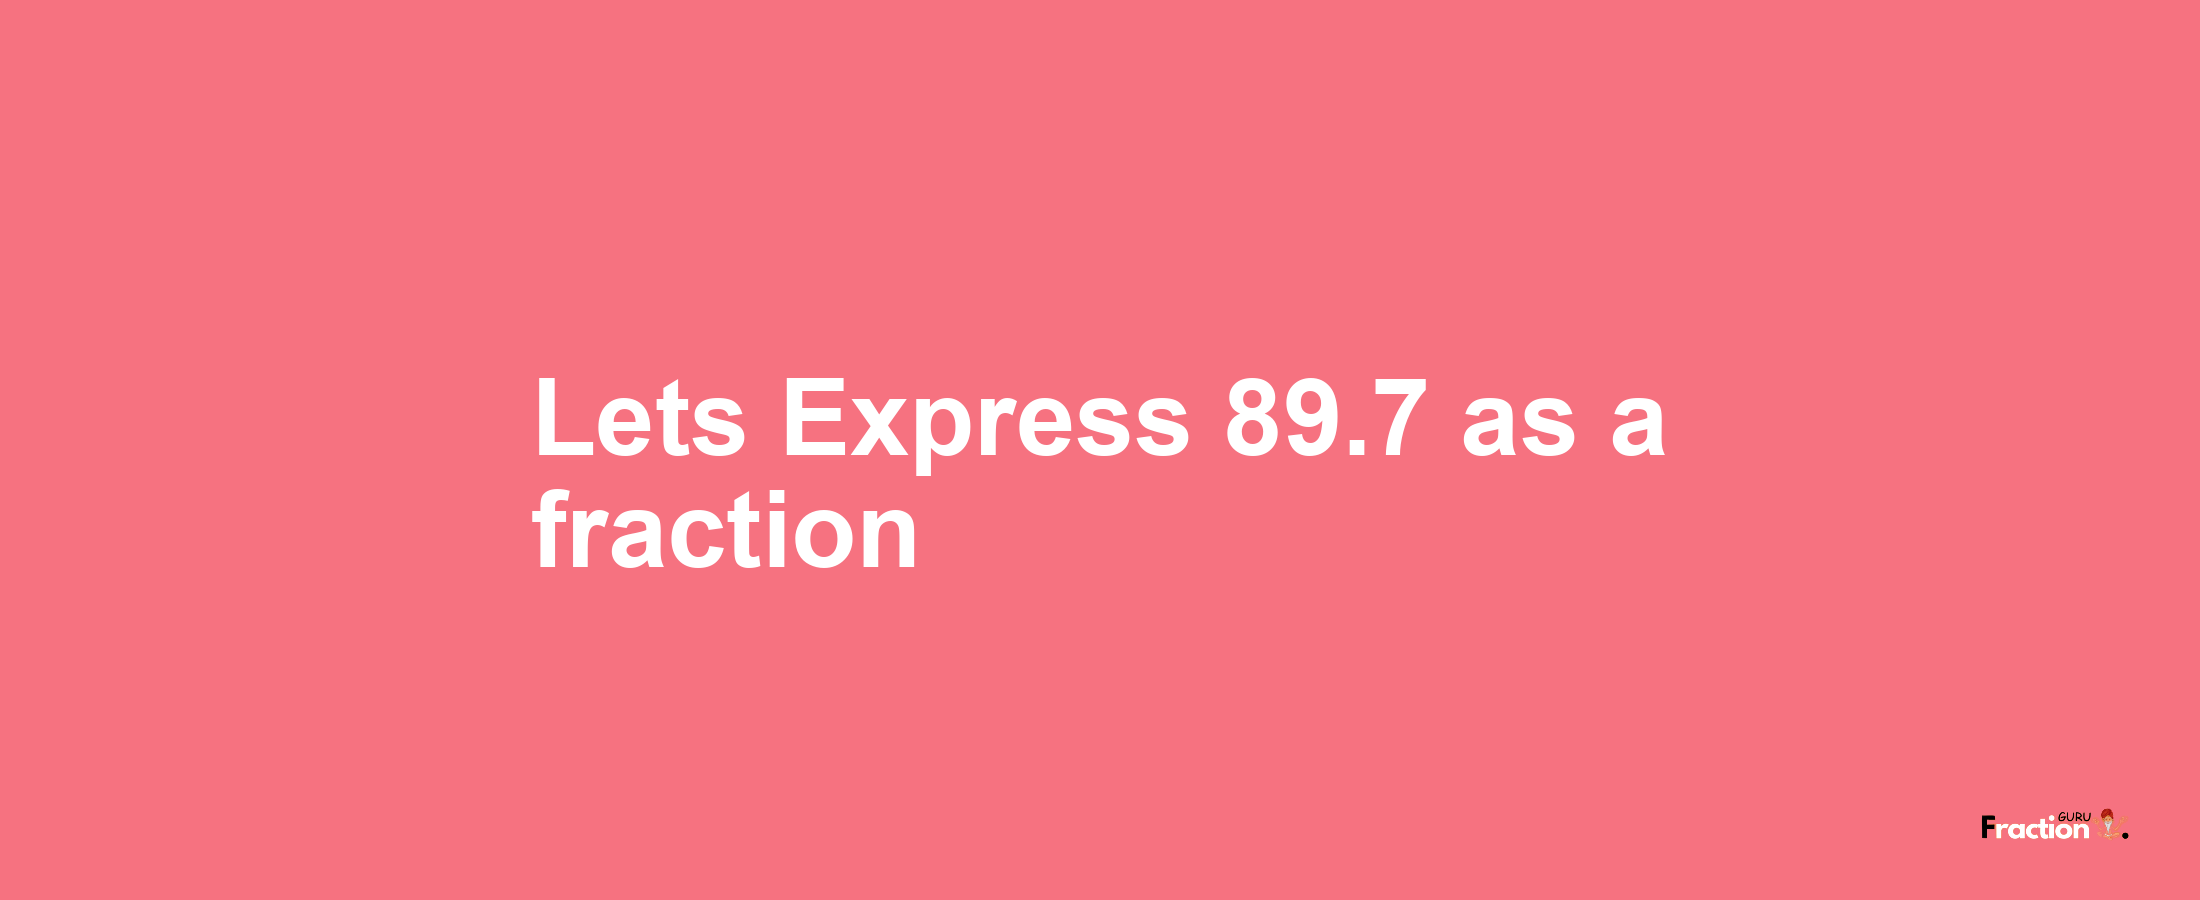 Lets Express 89.7 as afraction